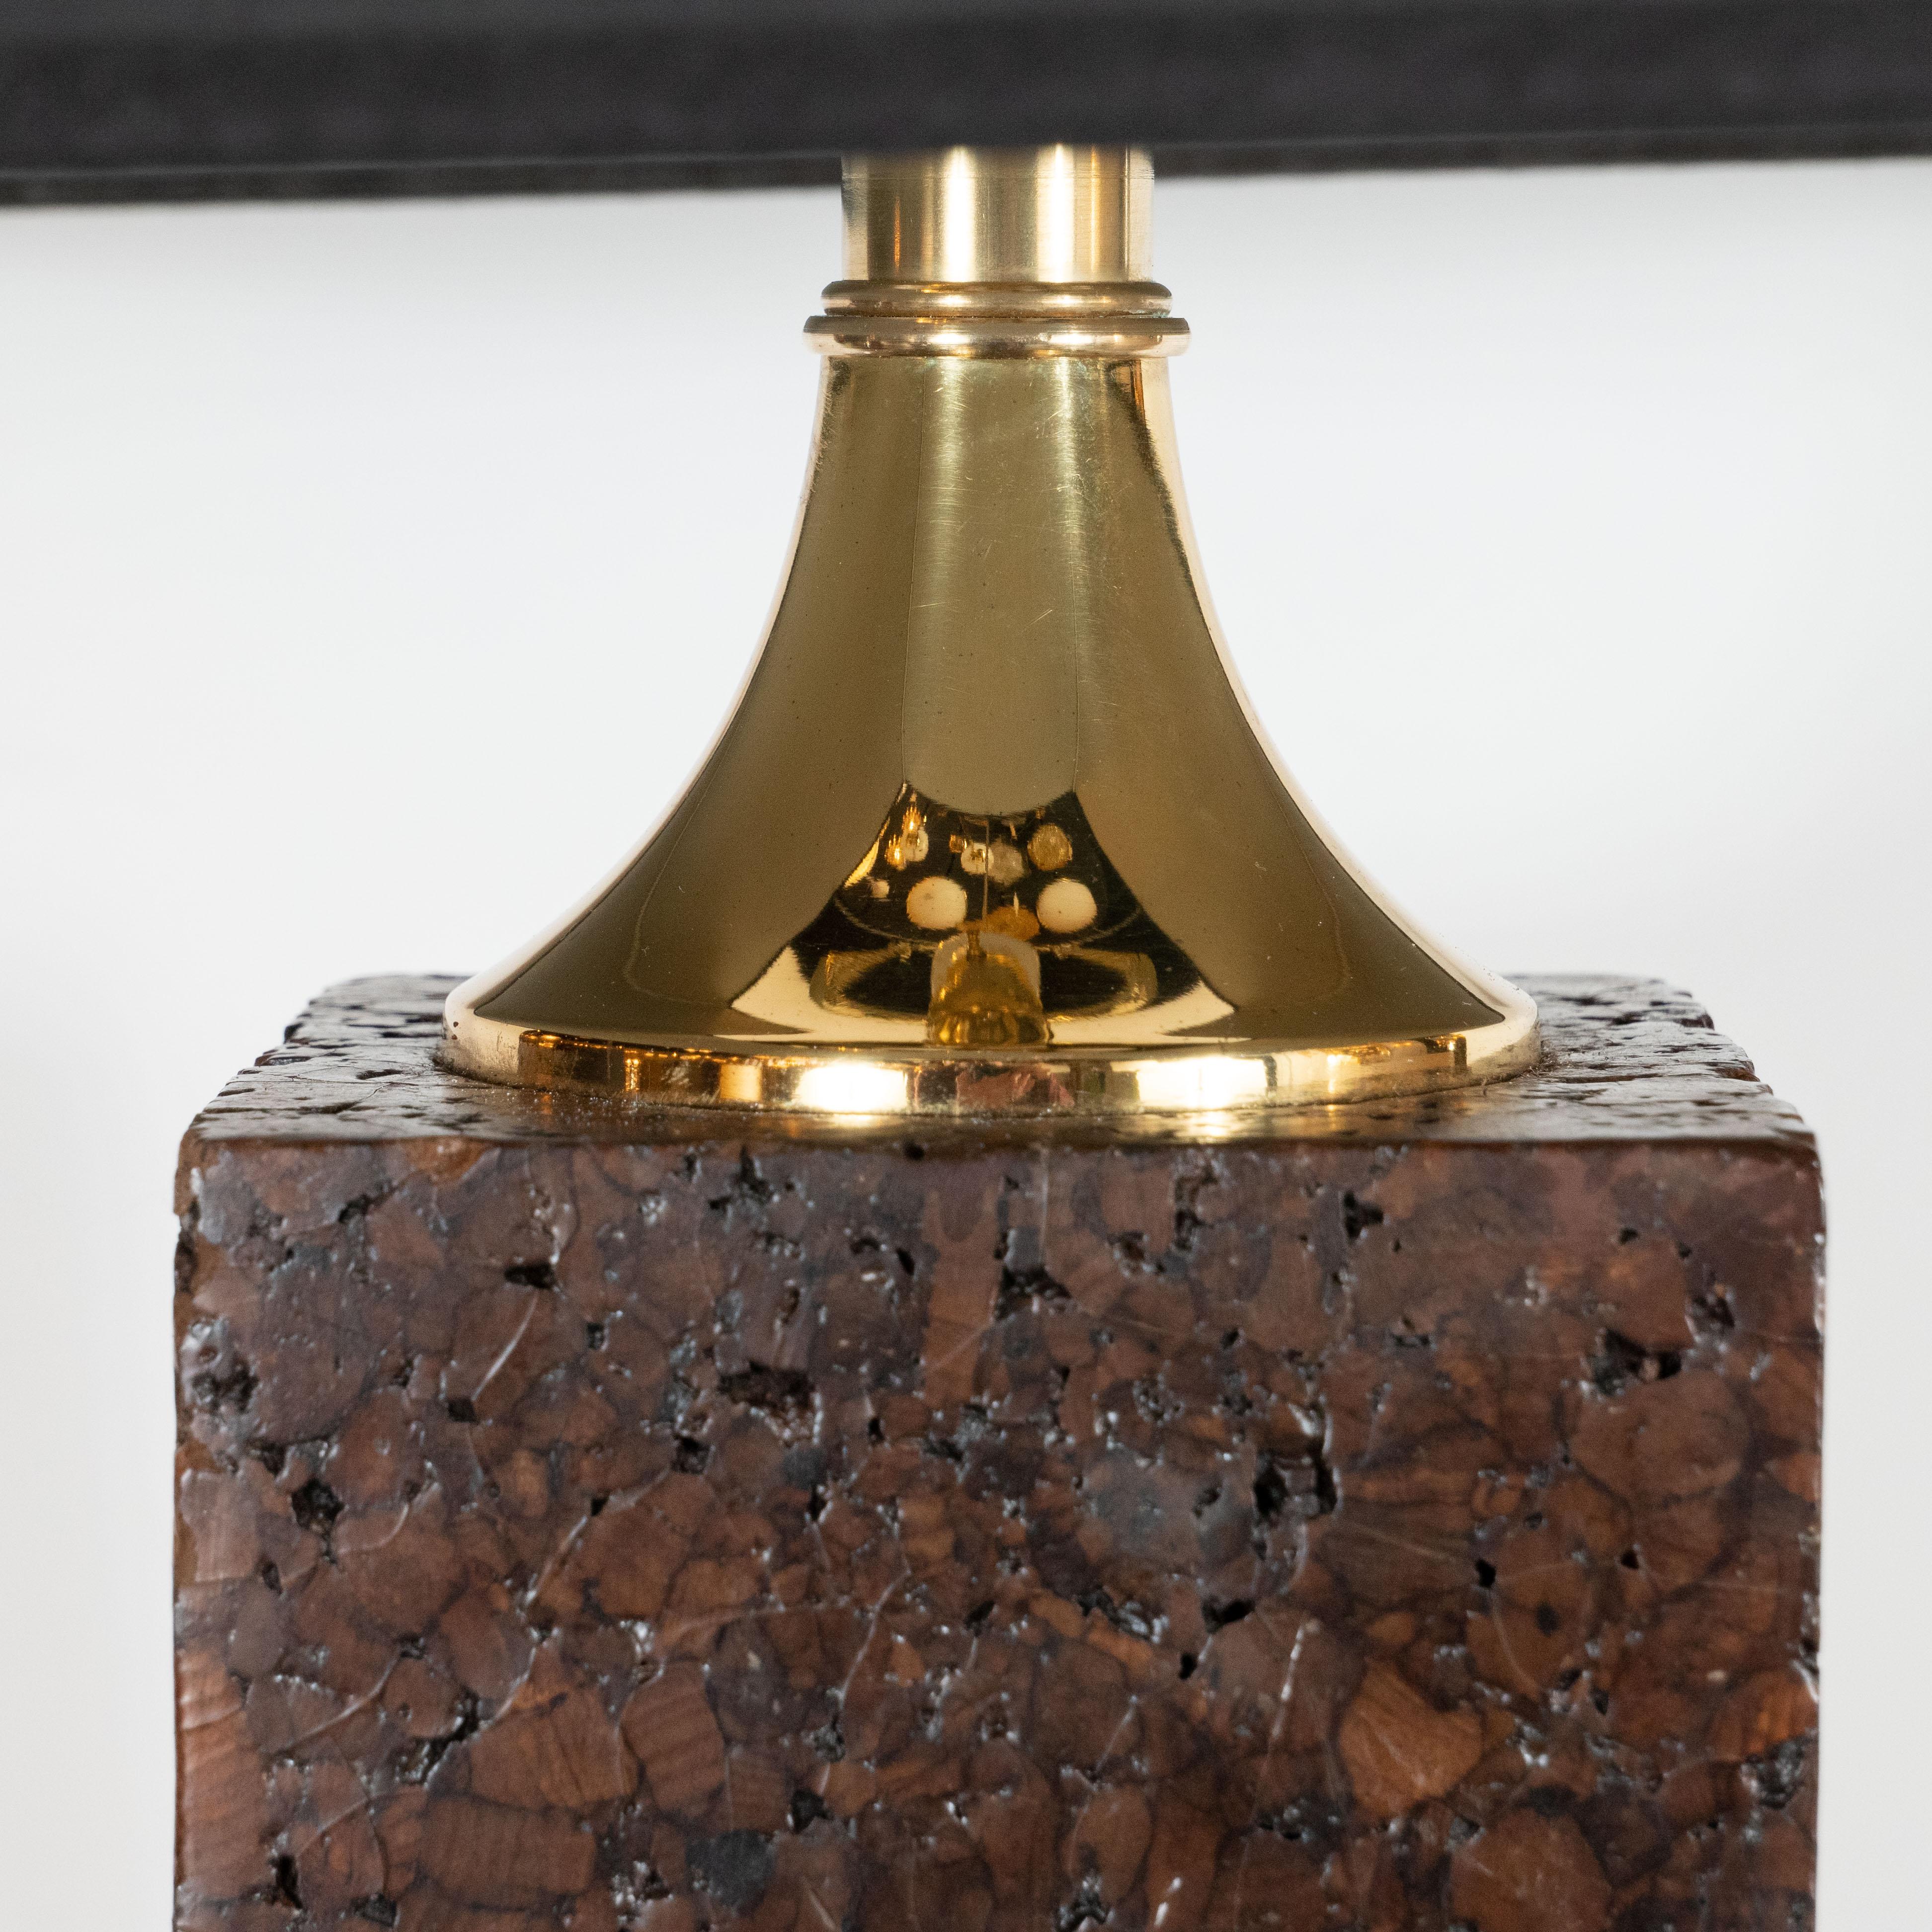 Pair of Sculptural Mid-Century Modern Polished Brass and Cork Table Lamps For Sale 1